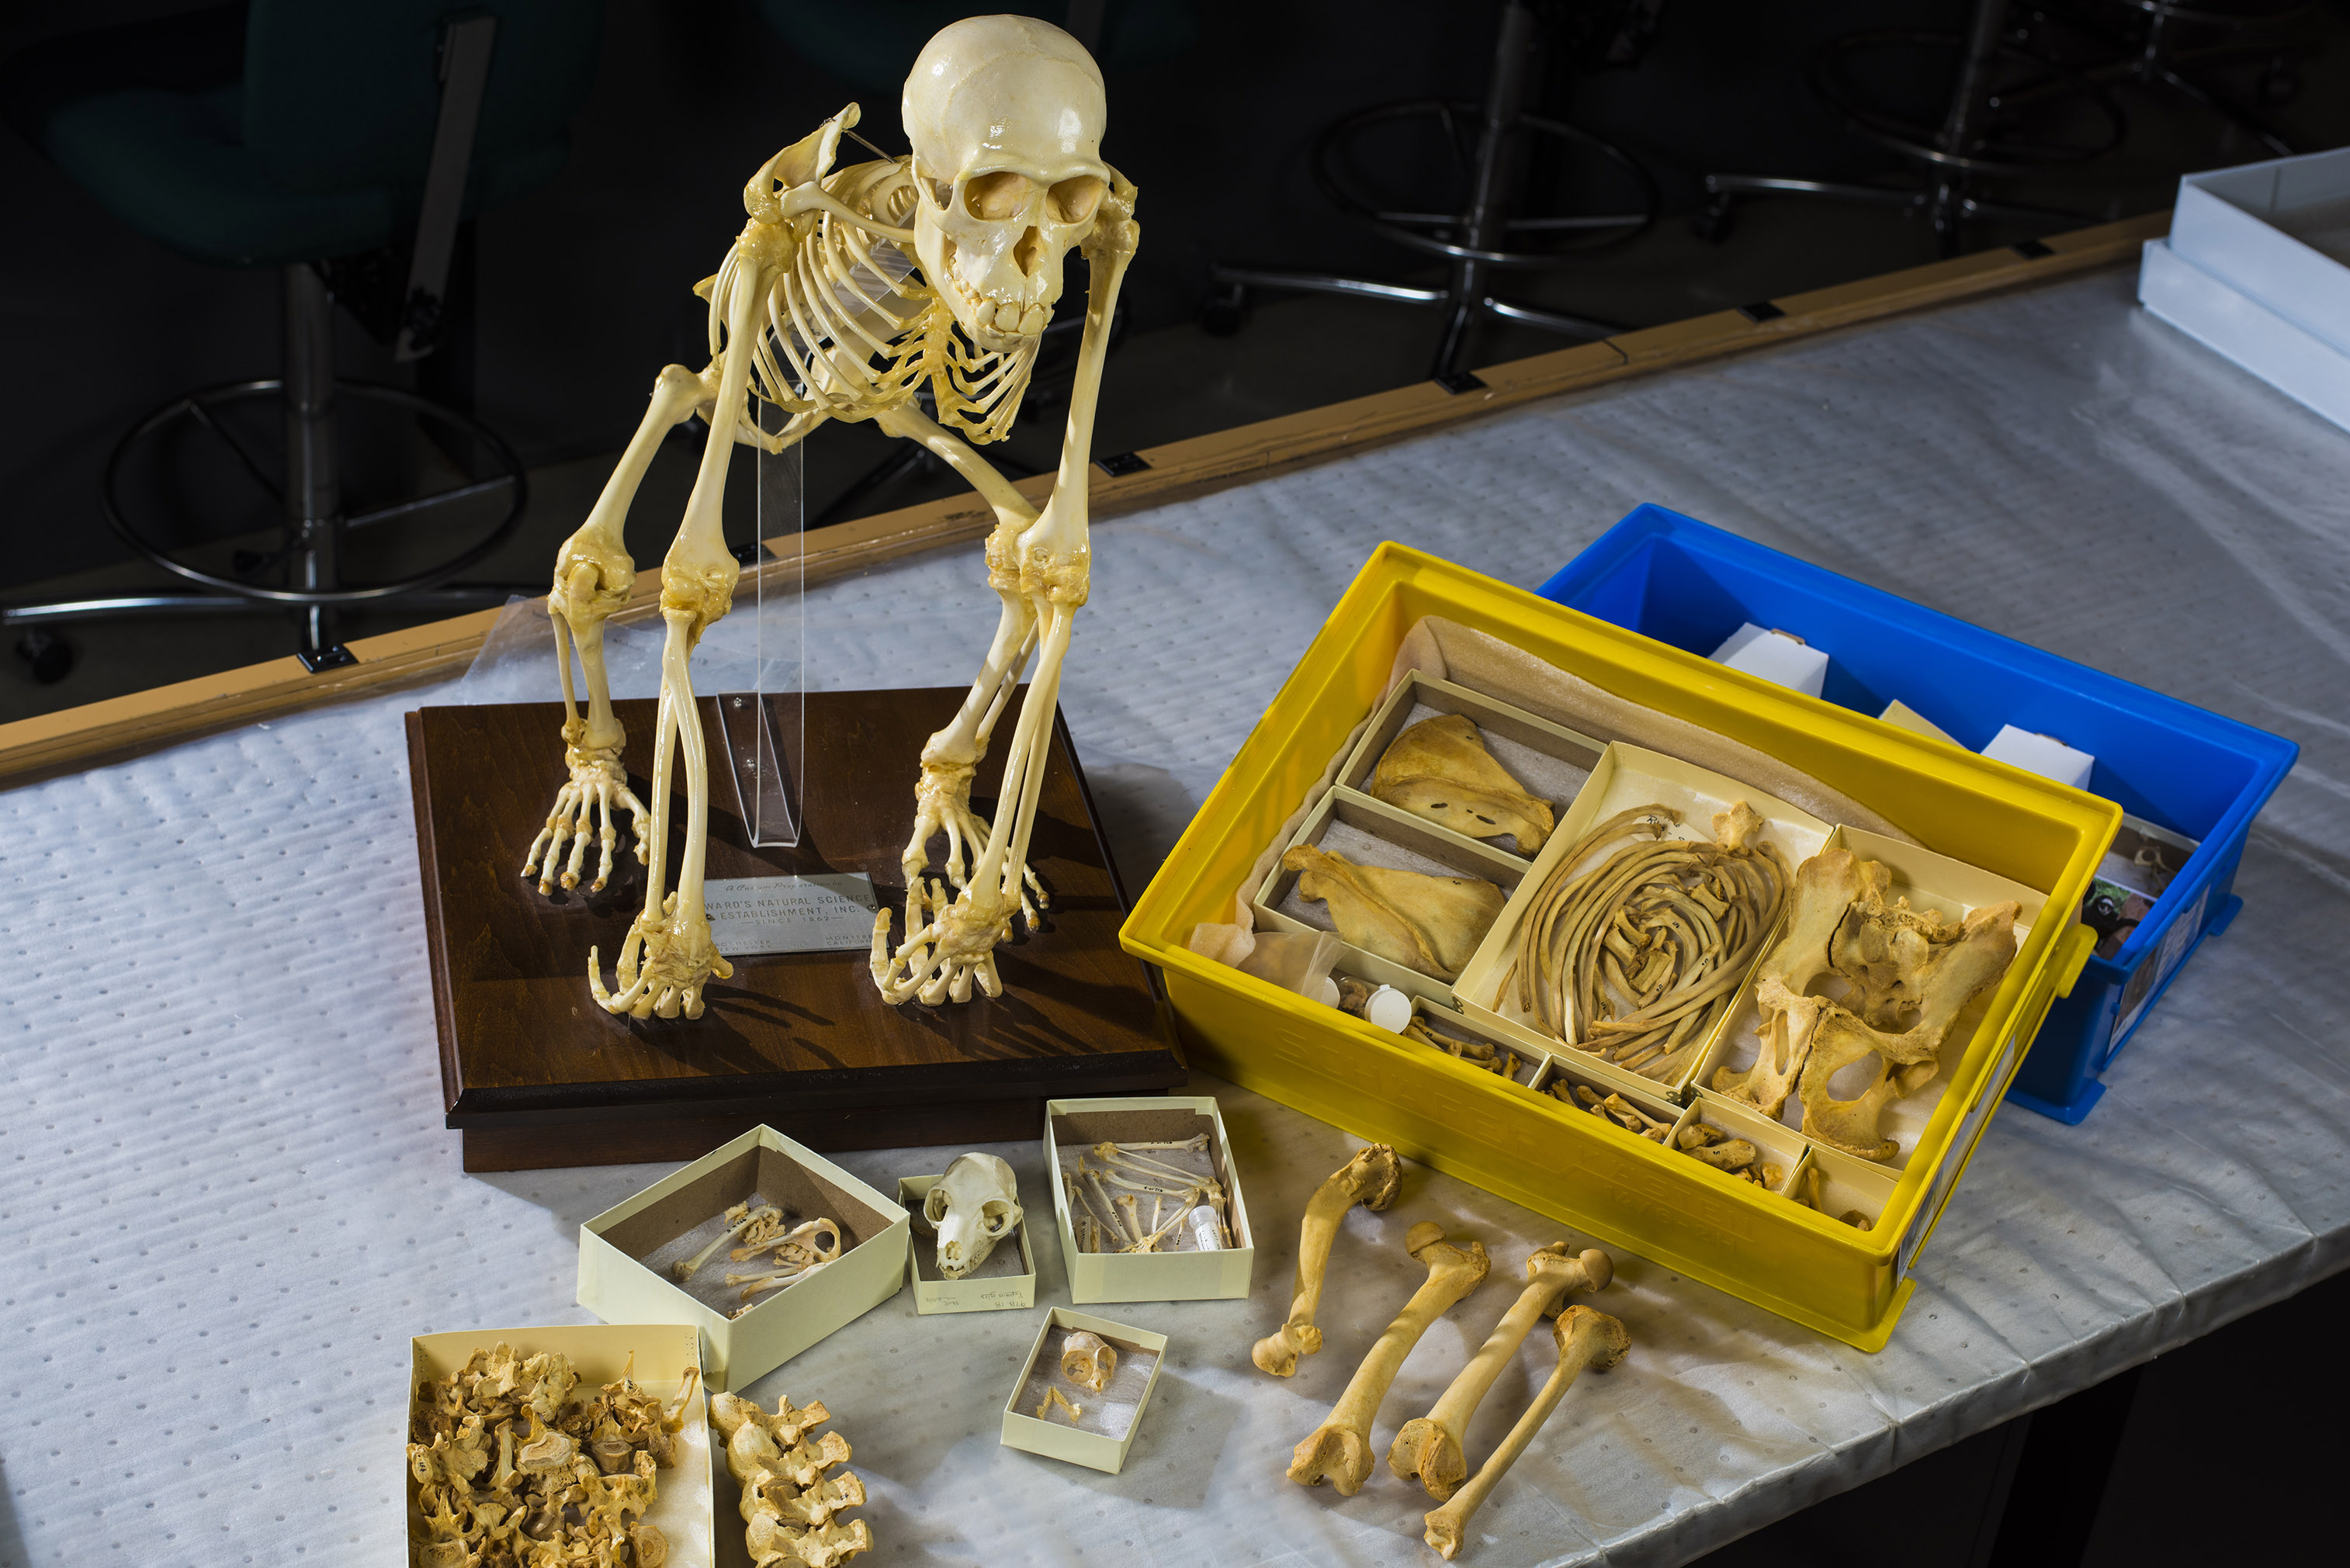  small skeleton resting on its knuckles, with multiple types of bone specimens displayed in boxes on a table.